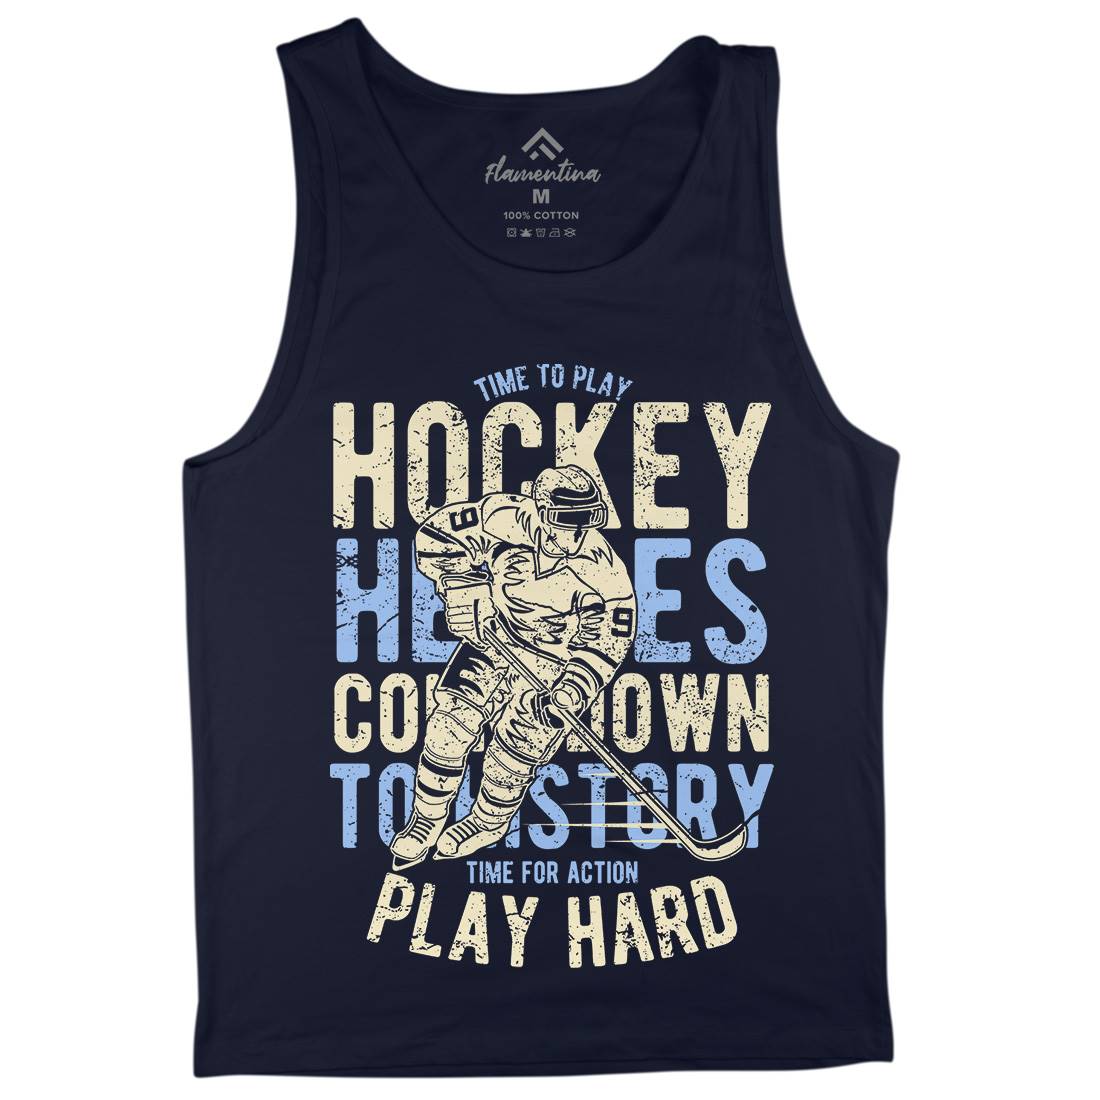 Time To Play Hockey Mens Tank Top Vest Sport A179